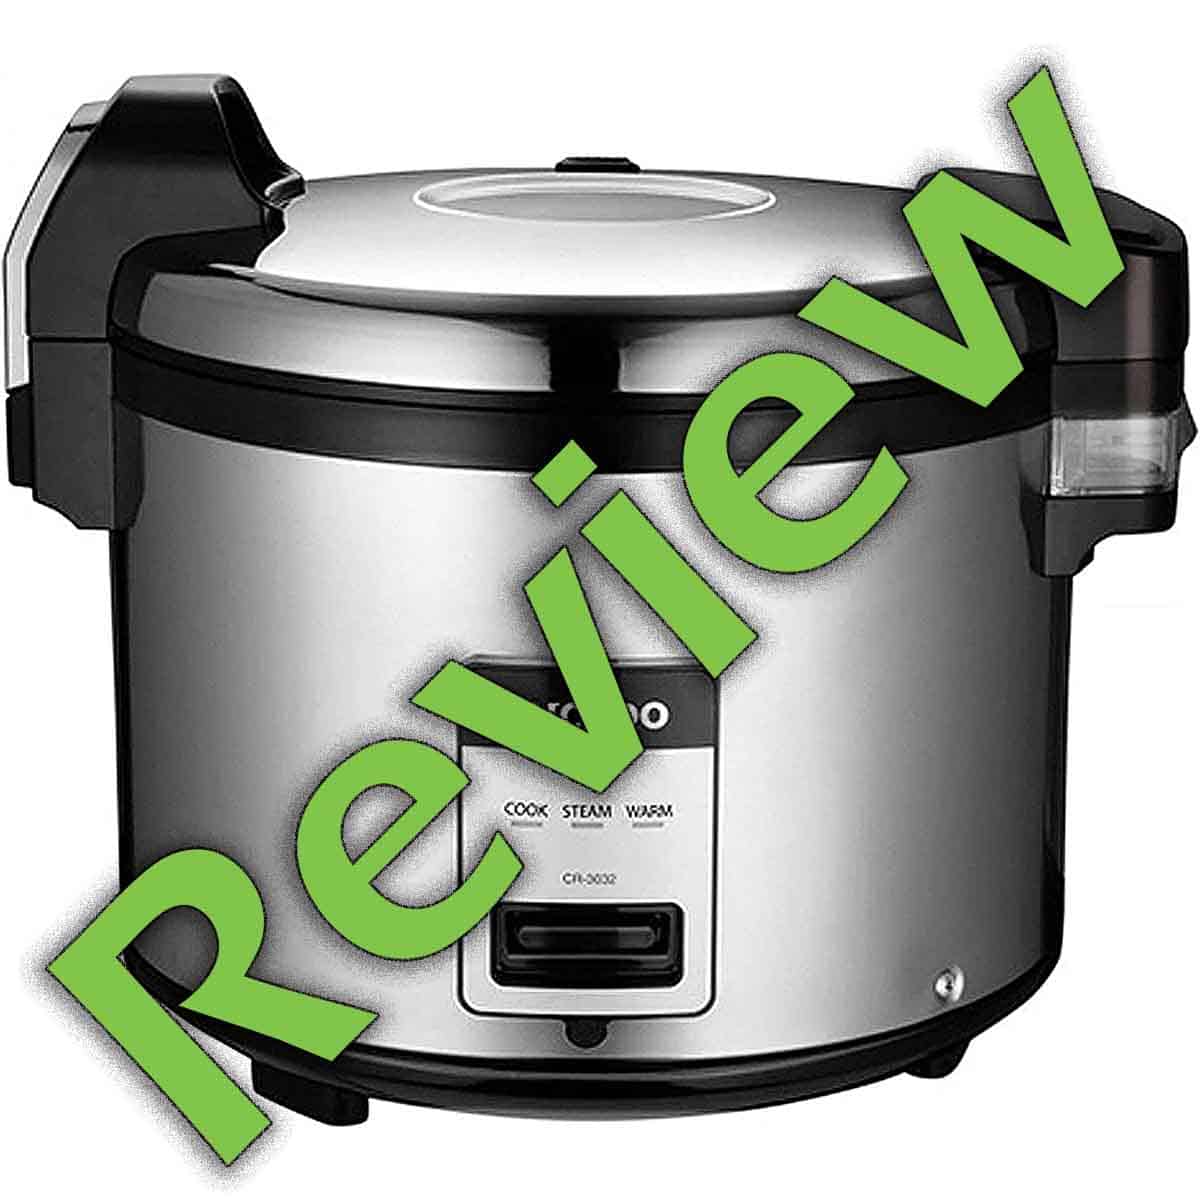 https://leelalicious.com/wp-content/uploads/2023/06/CUCKOO-CR-3032-Commercial-Rice-Cooker-Reviewed.jpg